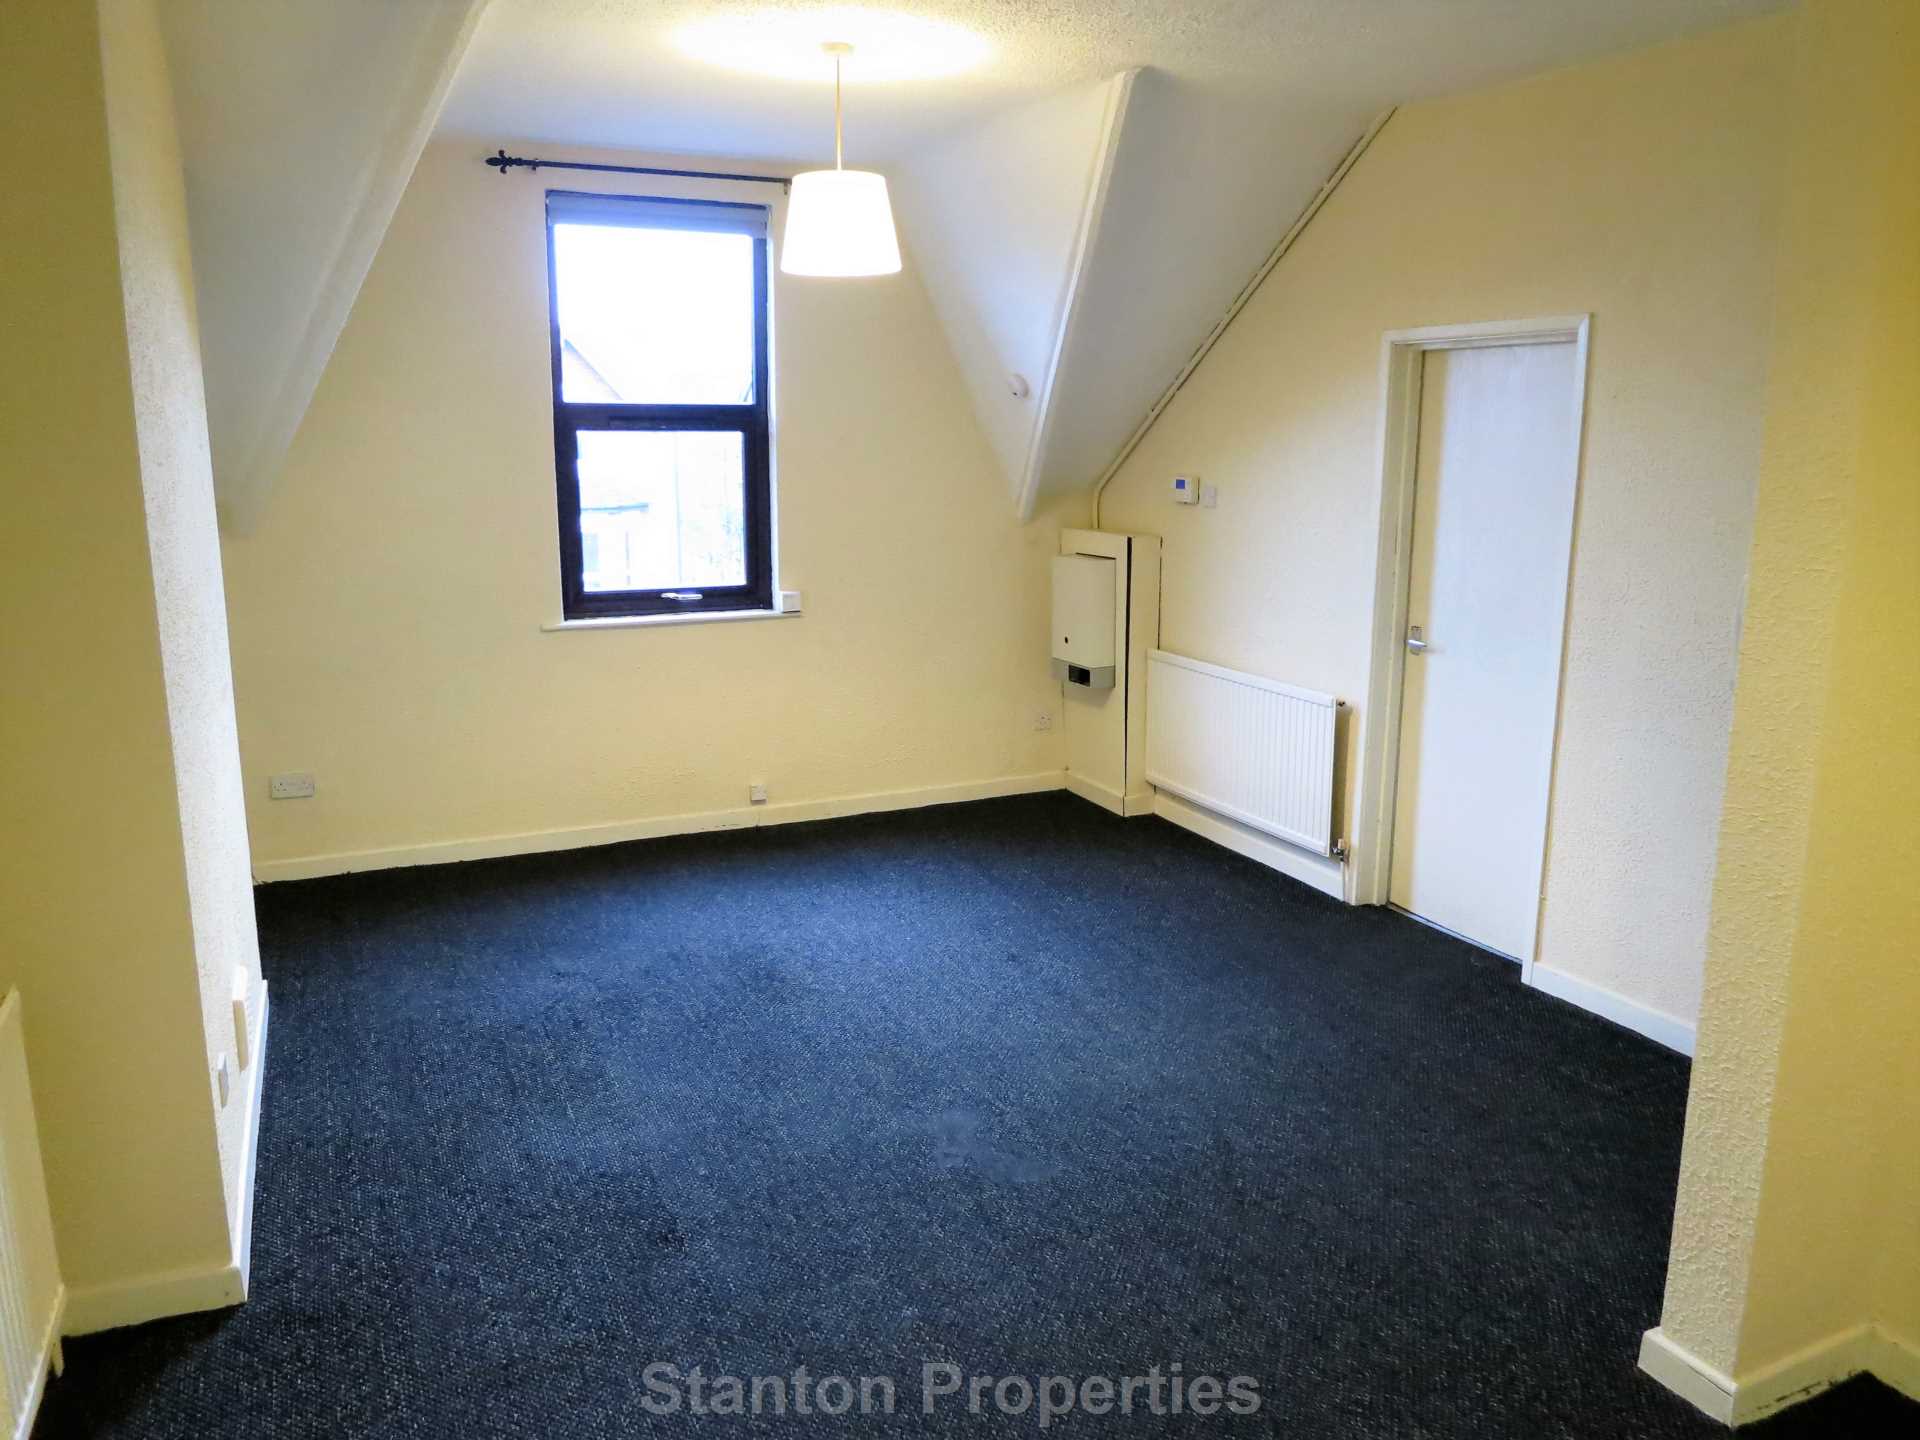 0 bed Apartment for rent in Manchester. From Stanton Properties